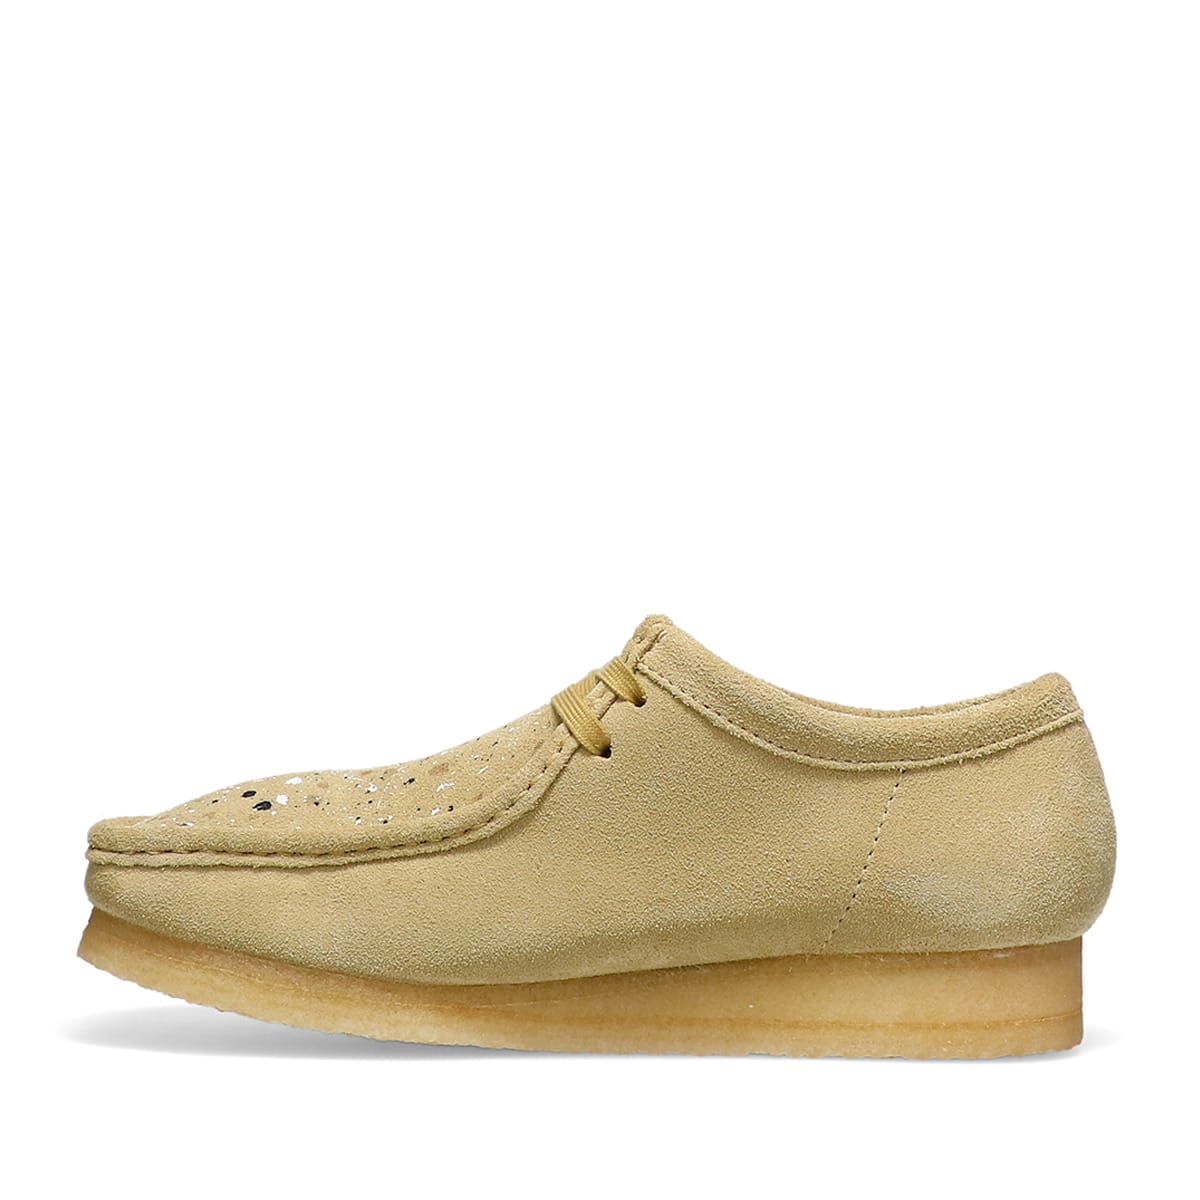 Clarks Wallabee WIND AND SEA atmos Maple